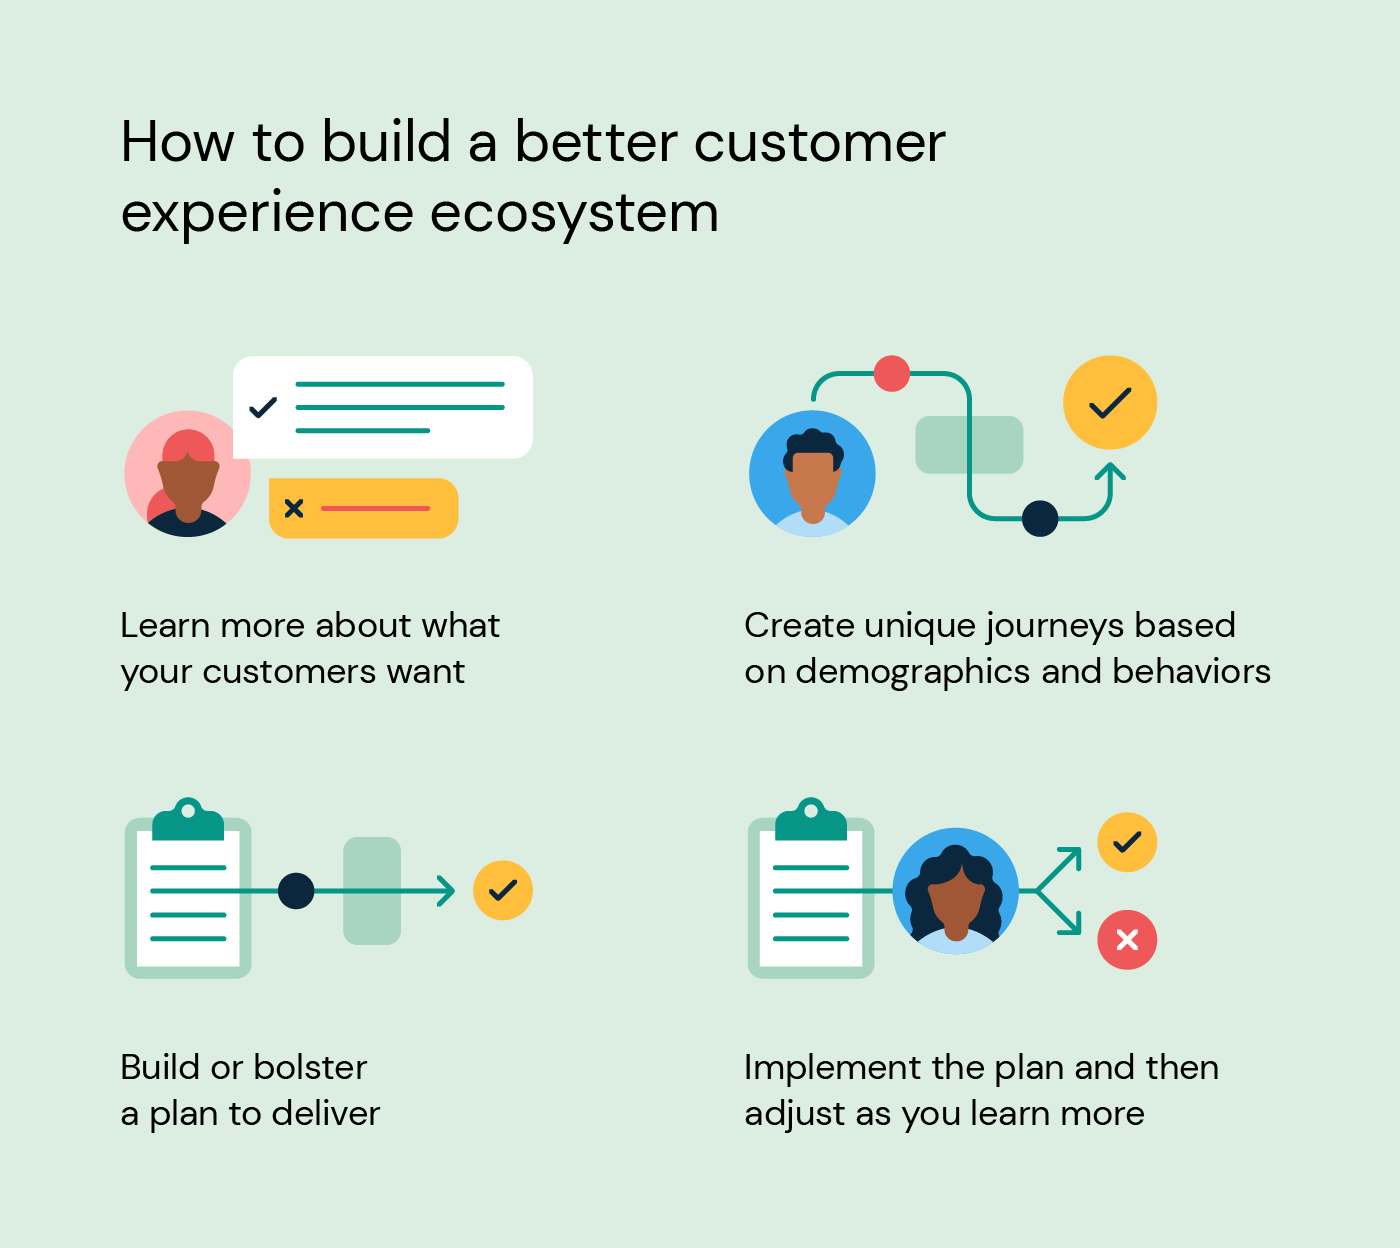 Illustration shows important steps to build a customer experience ecosystem